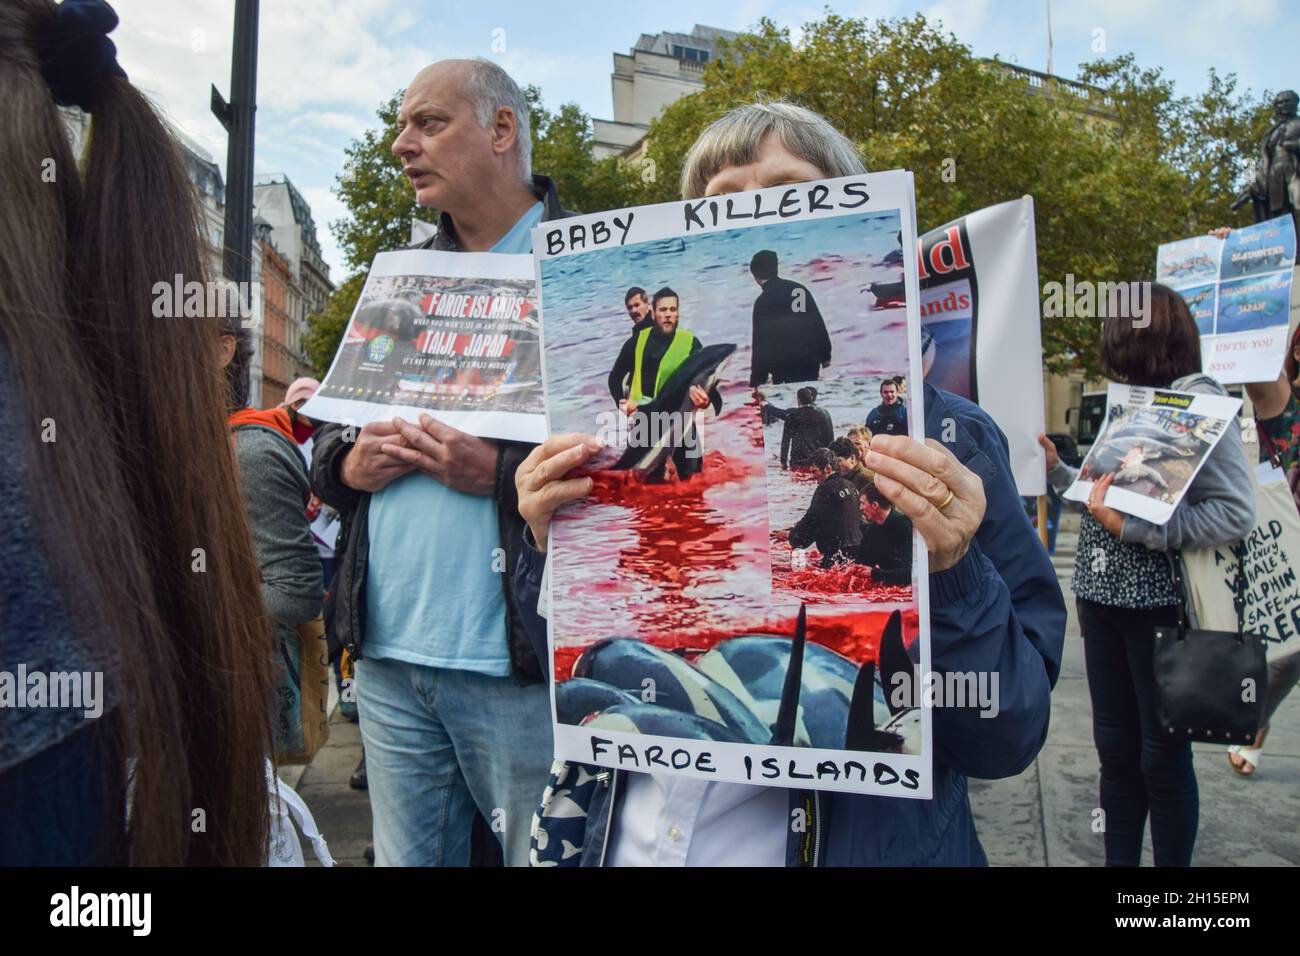 London, UK. 16th Oct, 2021. A protester holds a placard with a graphic image of dolphin killing in Faroe Islands during the demonstration in Trafalgar Square.Members of marine conservation organization Sea Shepherd and other activists marched through Westminster, calling for an end to the slaughter of dolphins in Faroe Islands and Taiji, Japan. (Photo by Vuk Valcic/SOPA Images/Sipa USA) Credit: Sipa USA/Alamy Live News Stock Photo